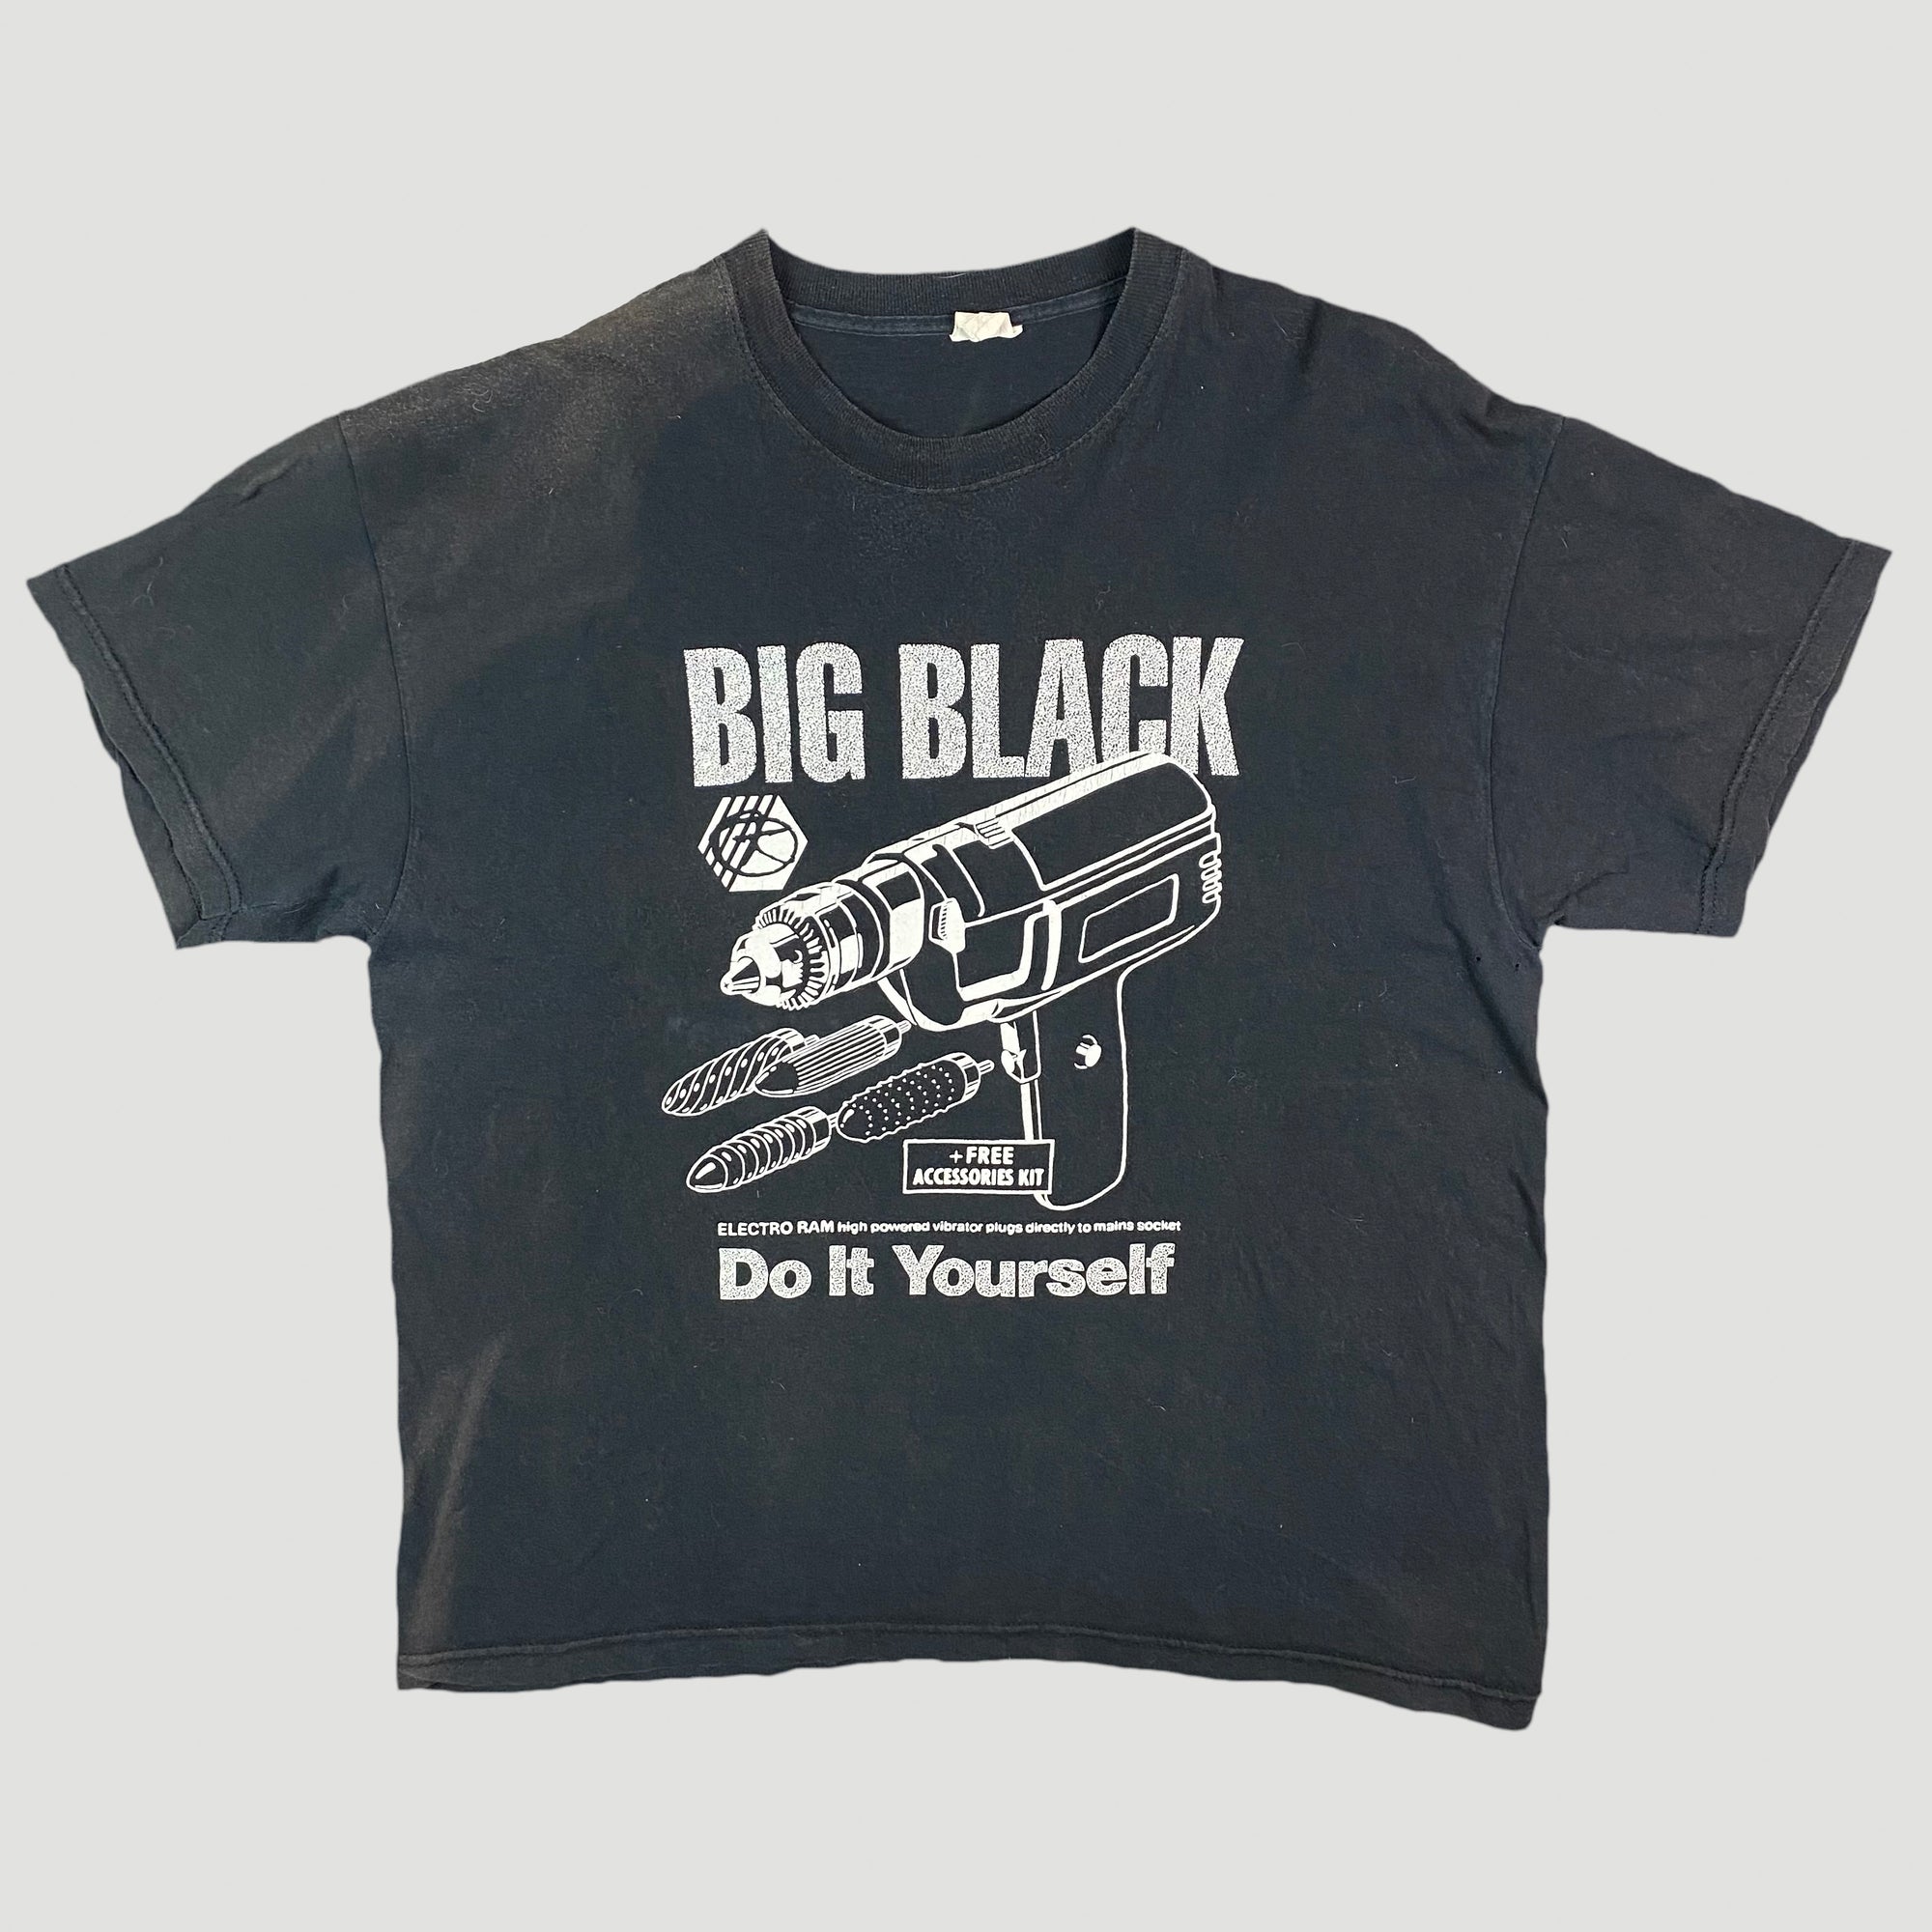 90s Bad Brains T-shirt Black by Unified Goods